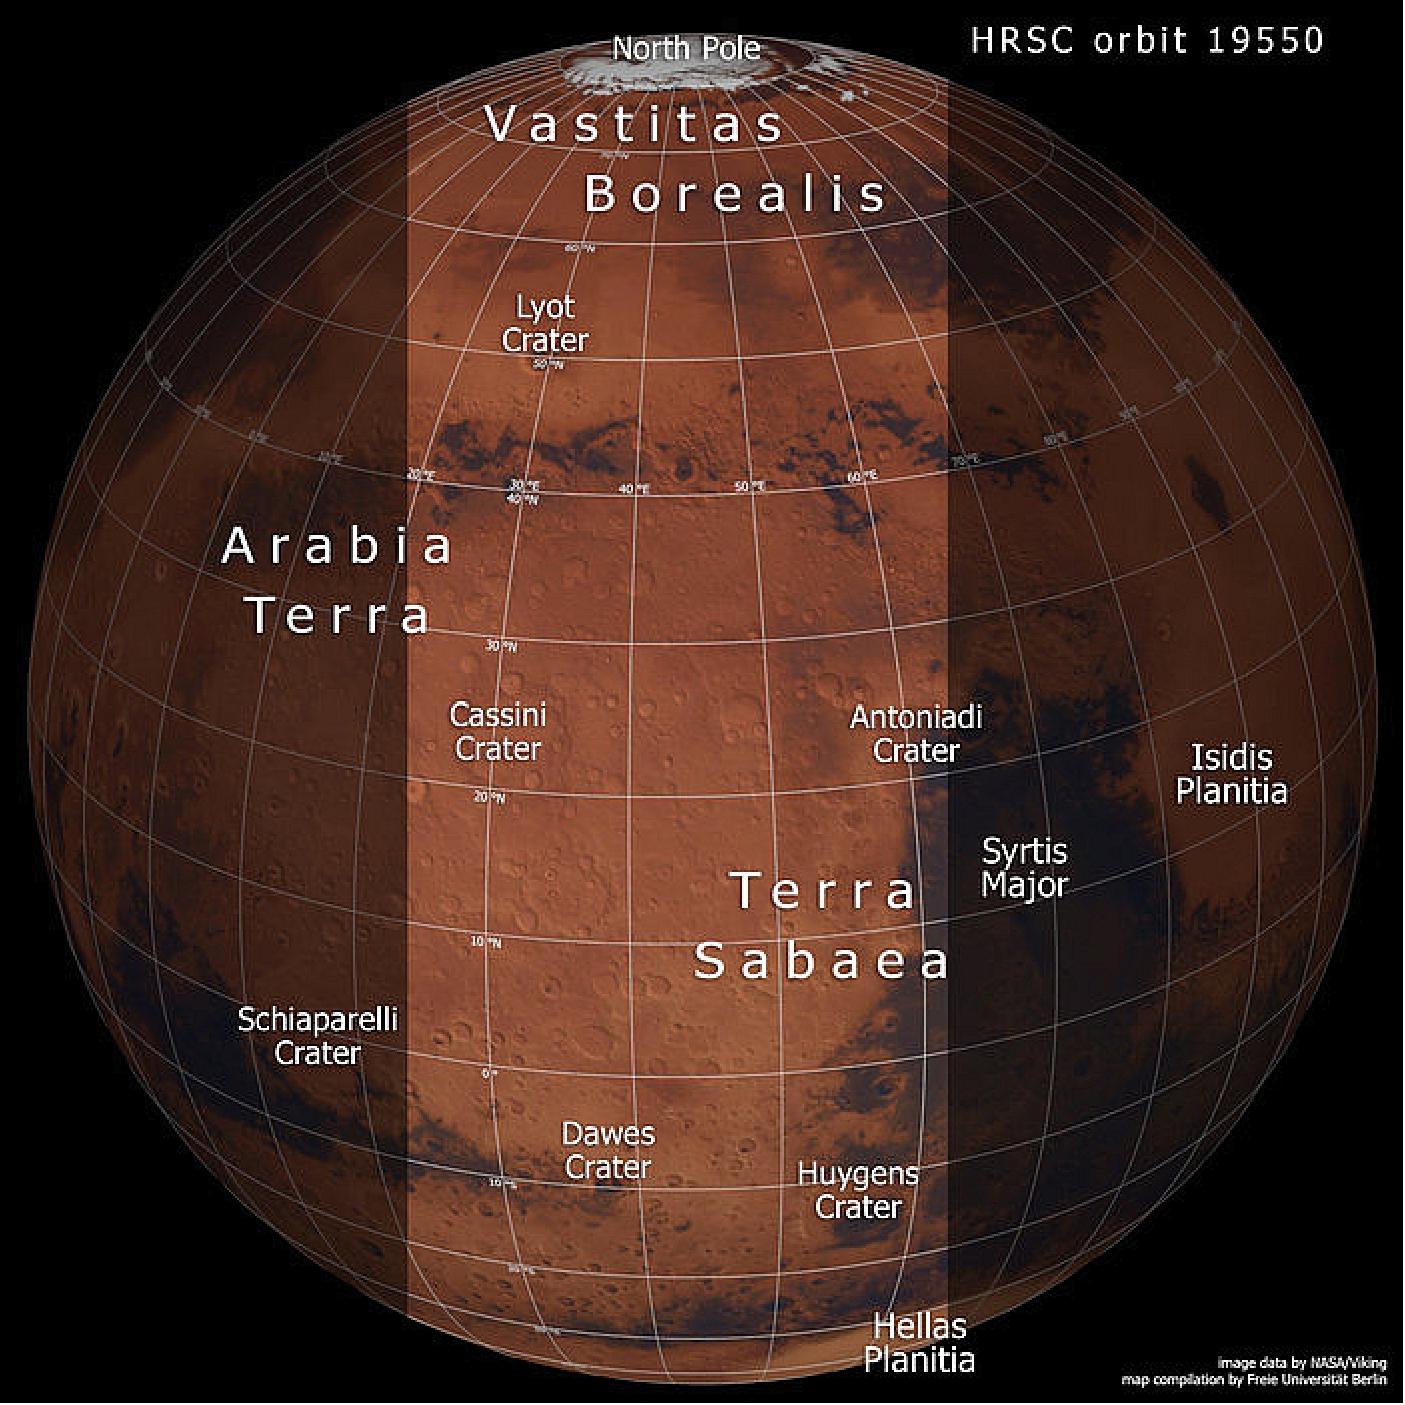 Figure 19: A slice of Mars in context: Terra Sabaea and Arabia Terra. This image shows a slice of the Red Planet from the northern polar cap downwards, and highlights cratered, pockmarked swathes of the Terra Sabaea and Arabia Terra regions. The area outlined in the center of the image indicates the area imaged by the Mars Express High Resolution Stereo Camera on 17 June 2019 during orbit 19550. This context map is based on data gathered by NASA's Viking and Mars Global Surveyor missions (image credit: NASA/Viking, FU Berlin)